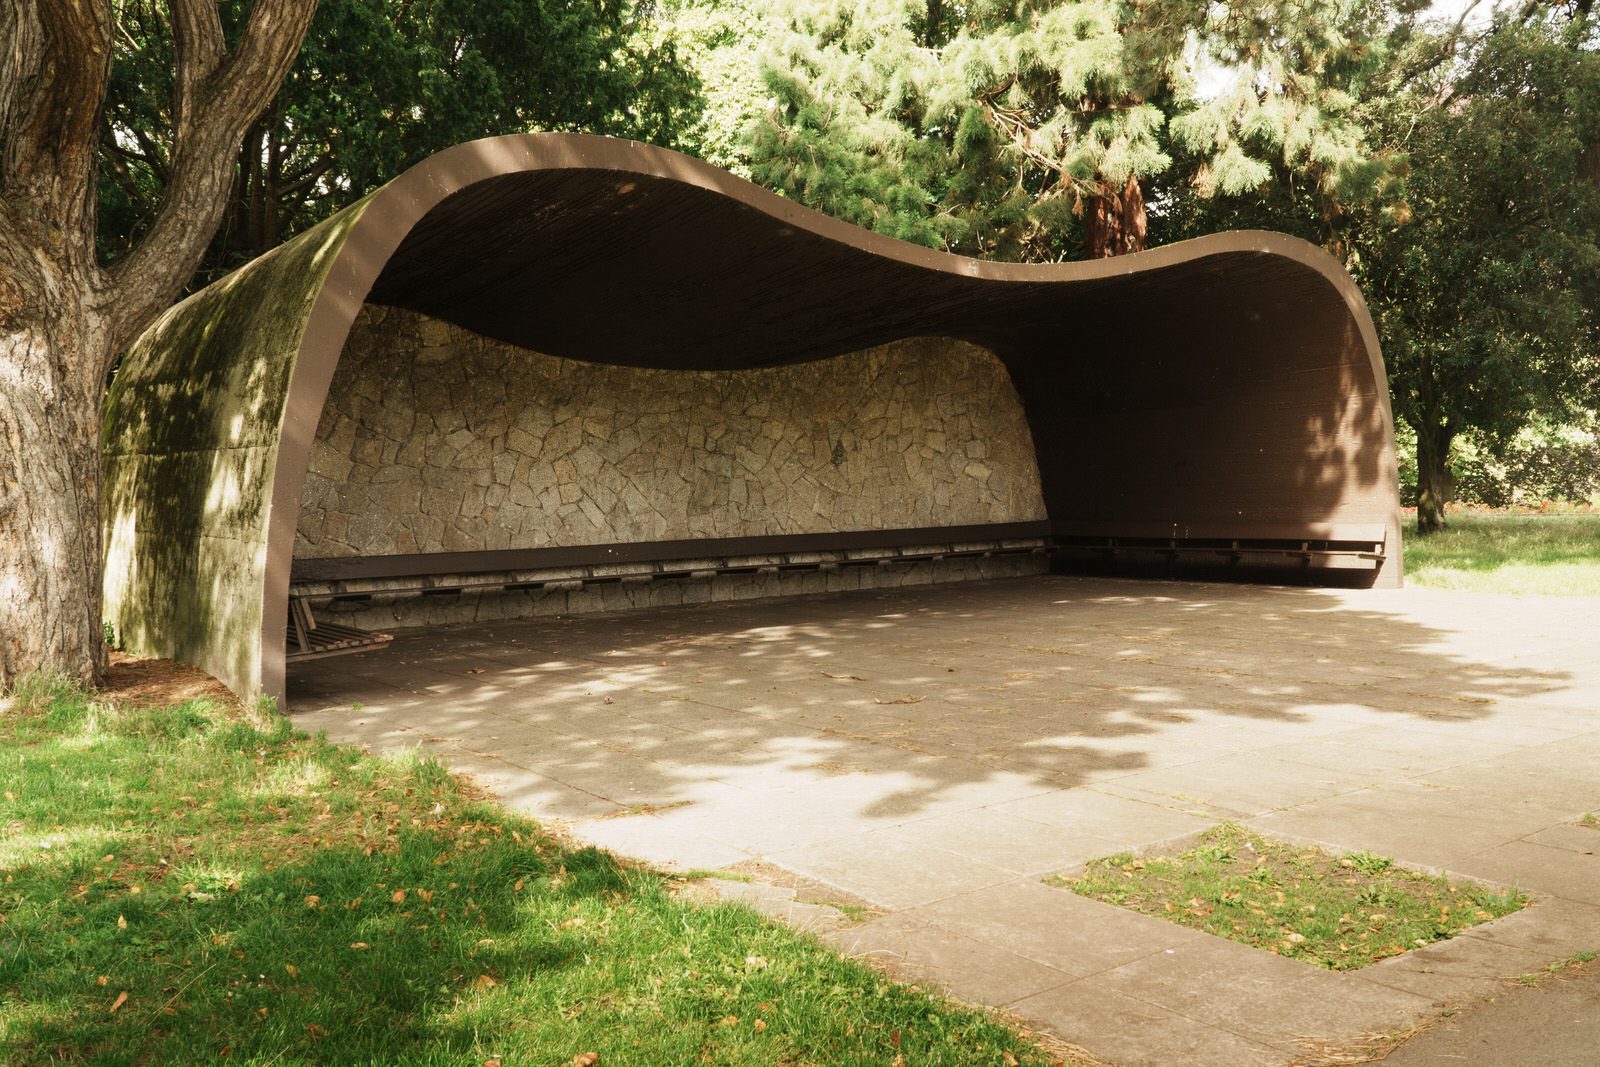 THE CONCRETE SHELTER IN PHOENIX PARK [LOCATED IN THE PEOPLE'S FLOWER GARDENS] 002